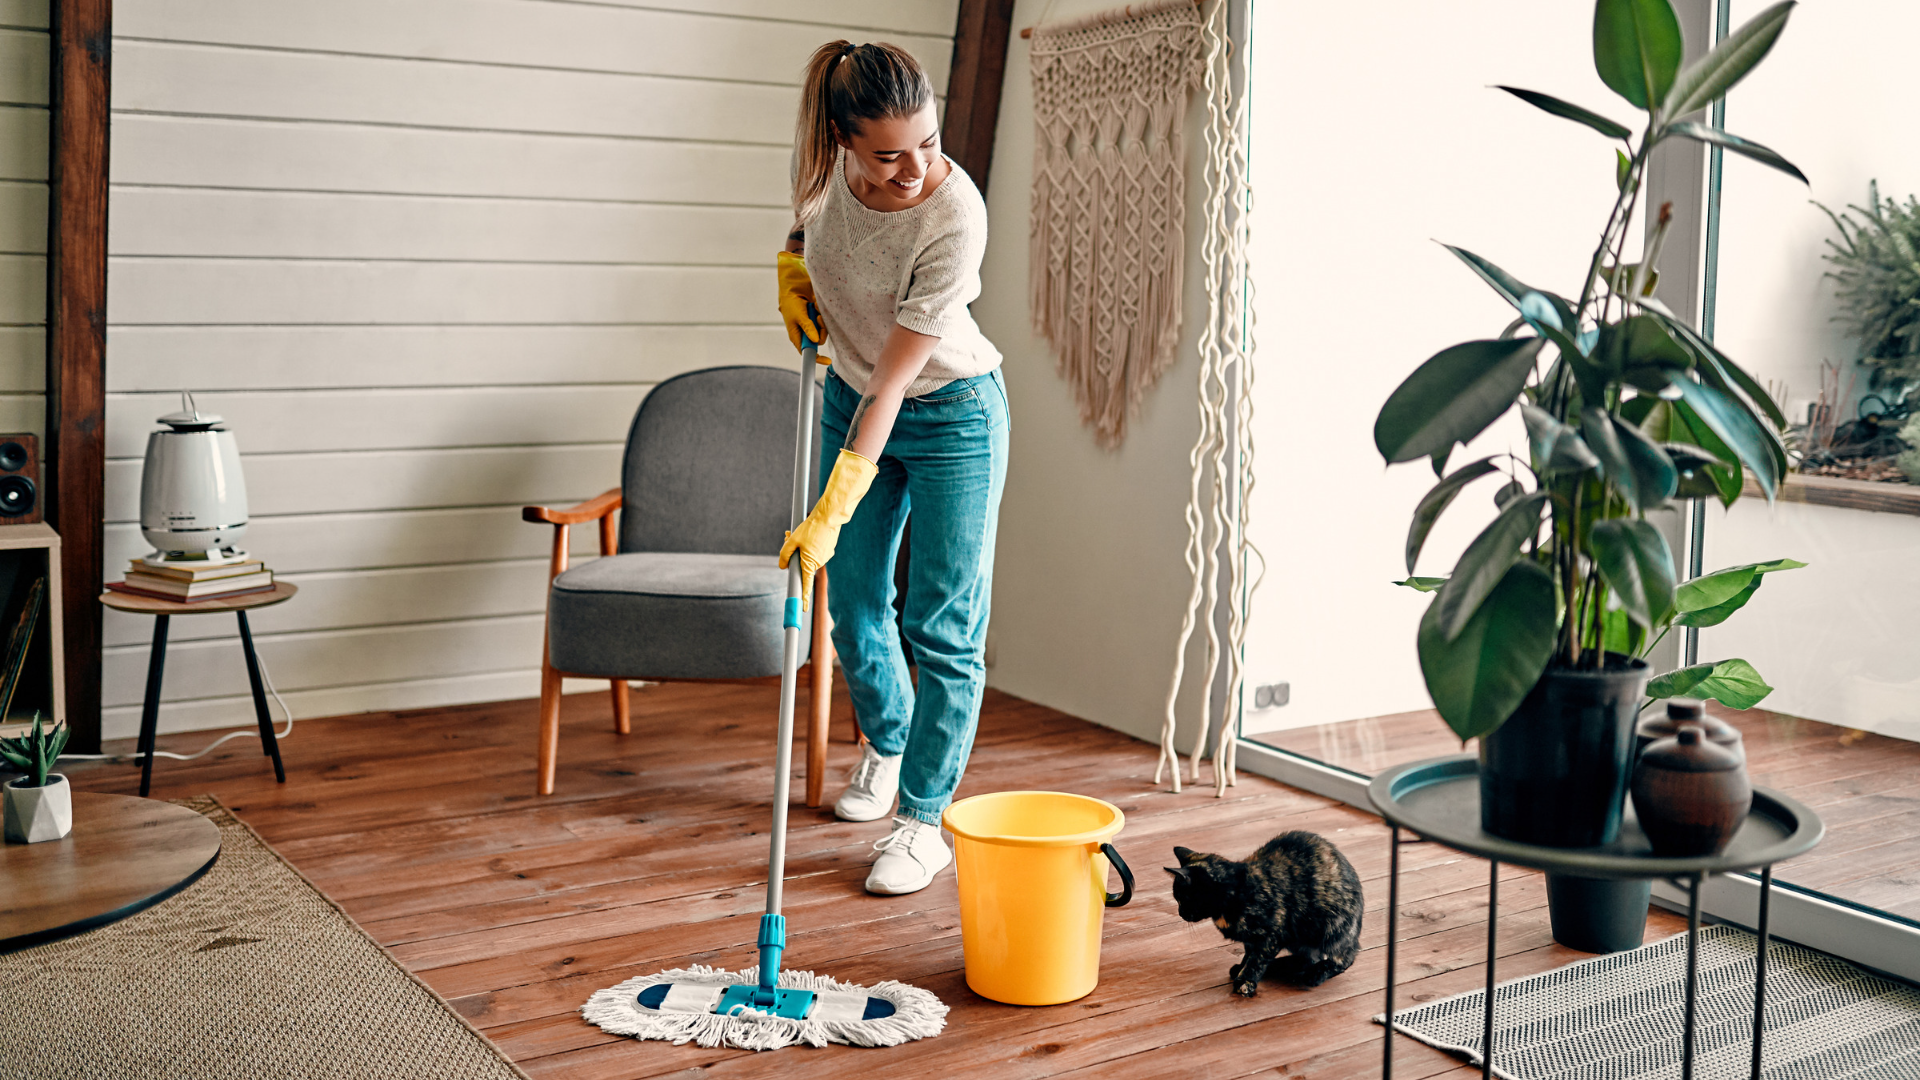 7 Places You Absolutely Have To Clean Before Guests Arrive